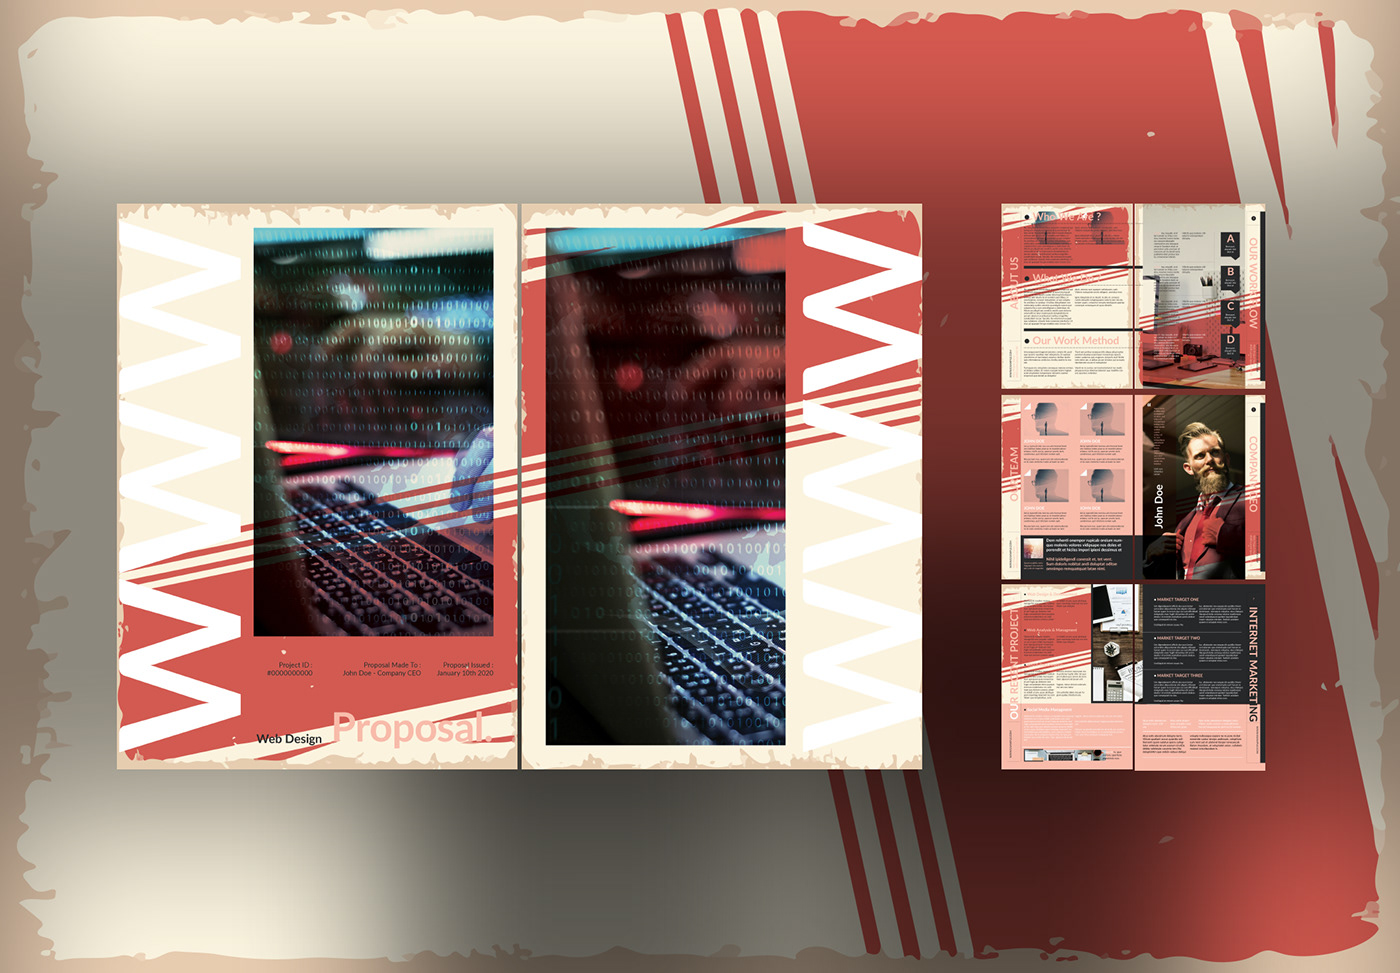 Web Design Proposal Layouts with Vintage Backgrounds